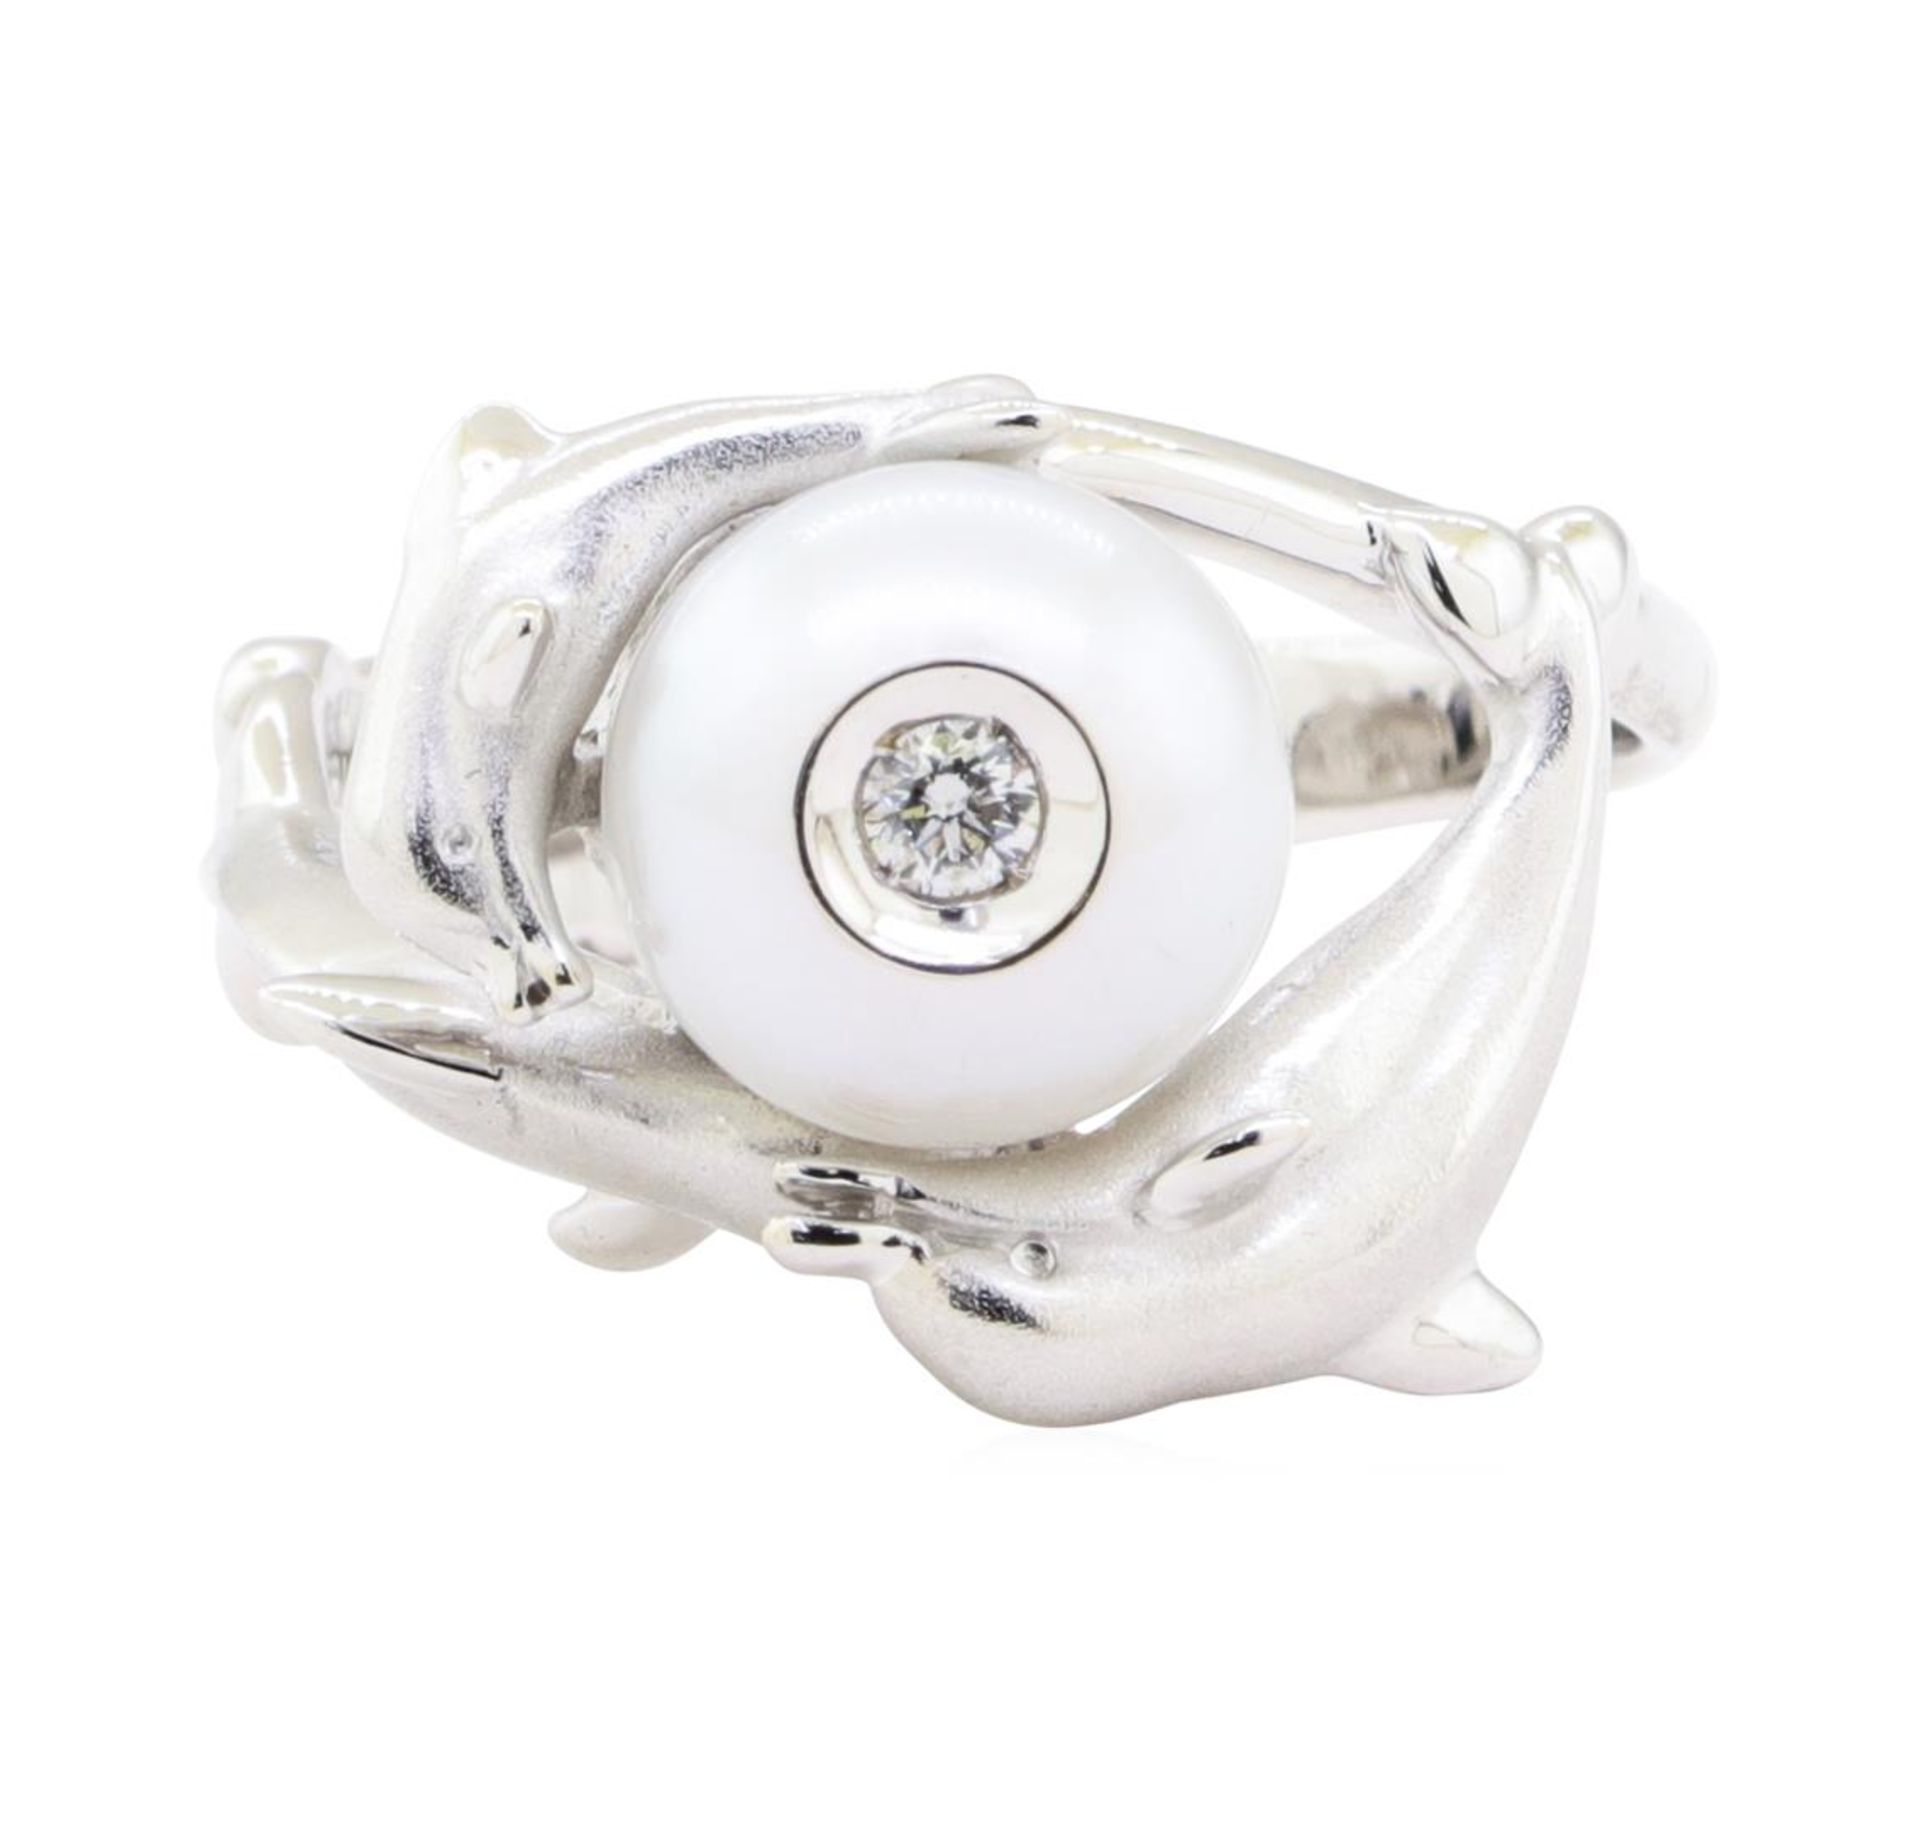 Galatea 0.06ct Diamond and Pearl Ring - 14KT White Gold - Image 2 of 4